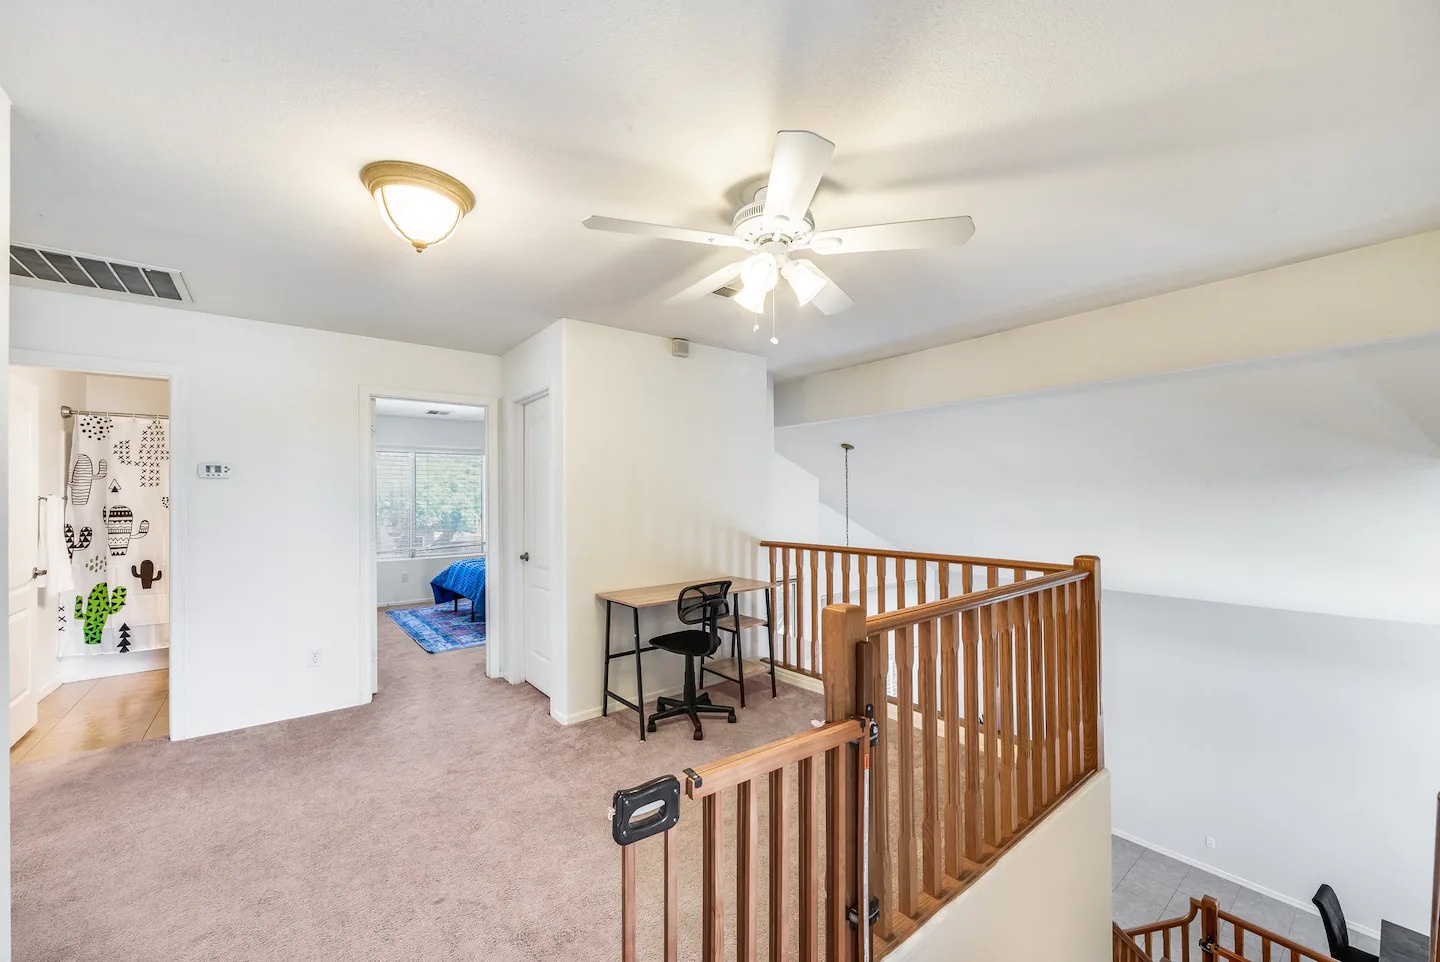 Peoria Vacation Rentals, Cherry Hills - Office in the upstairs area